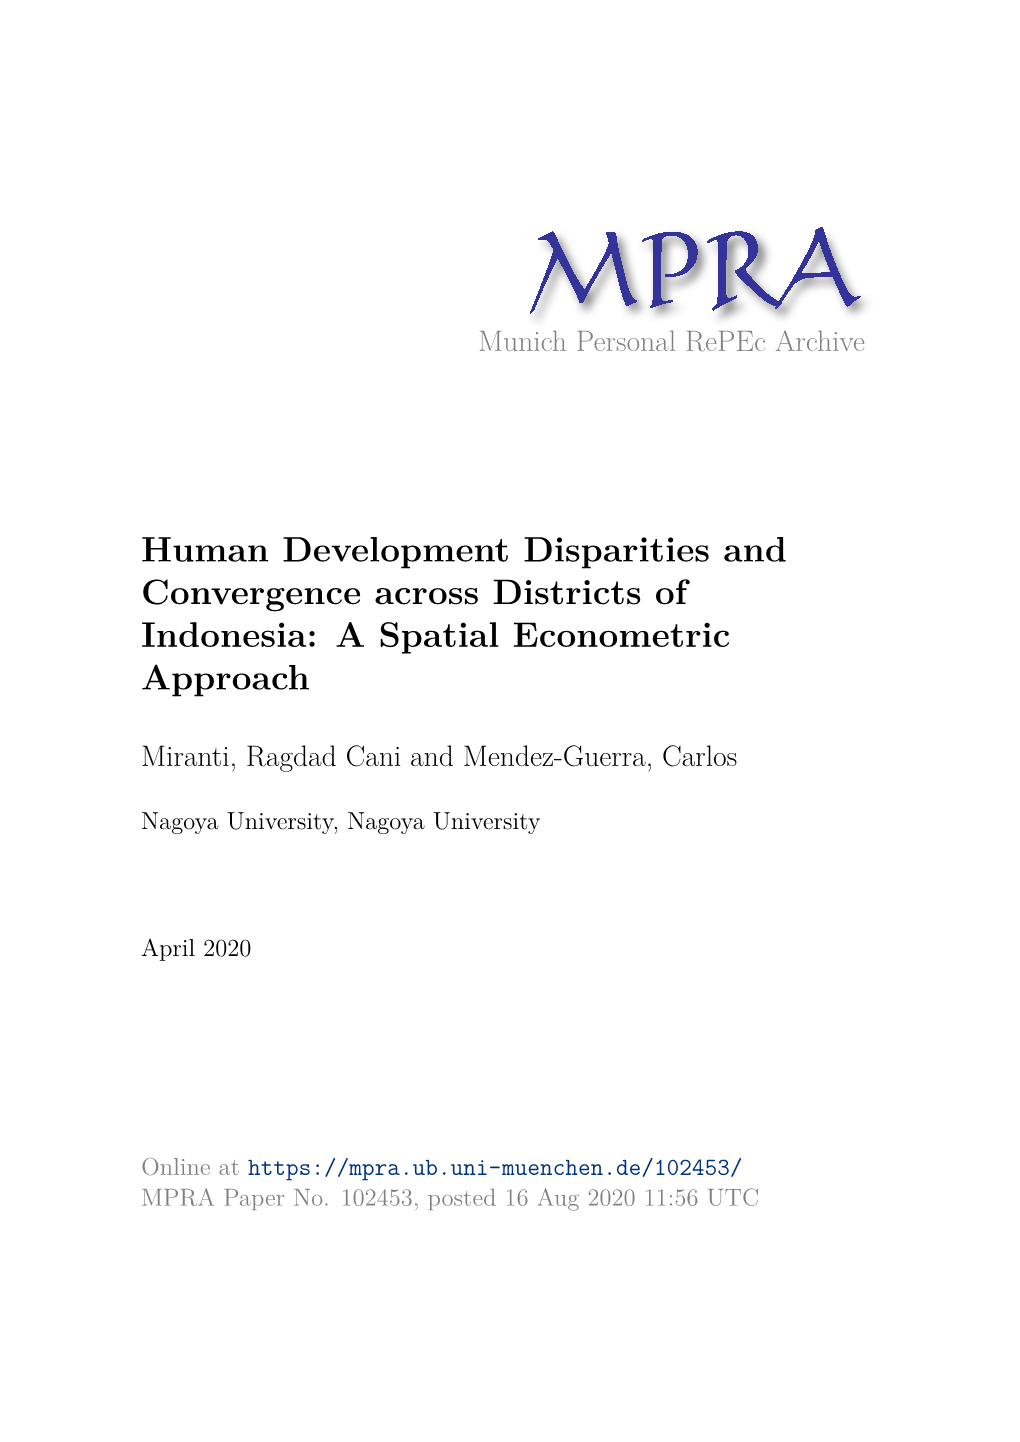 Human Development Disparities and Convergence Across Districts of Indonesia: a Spatial Econometric Approach